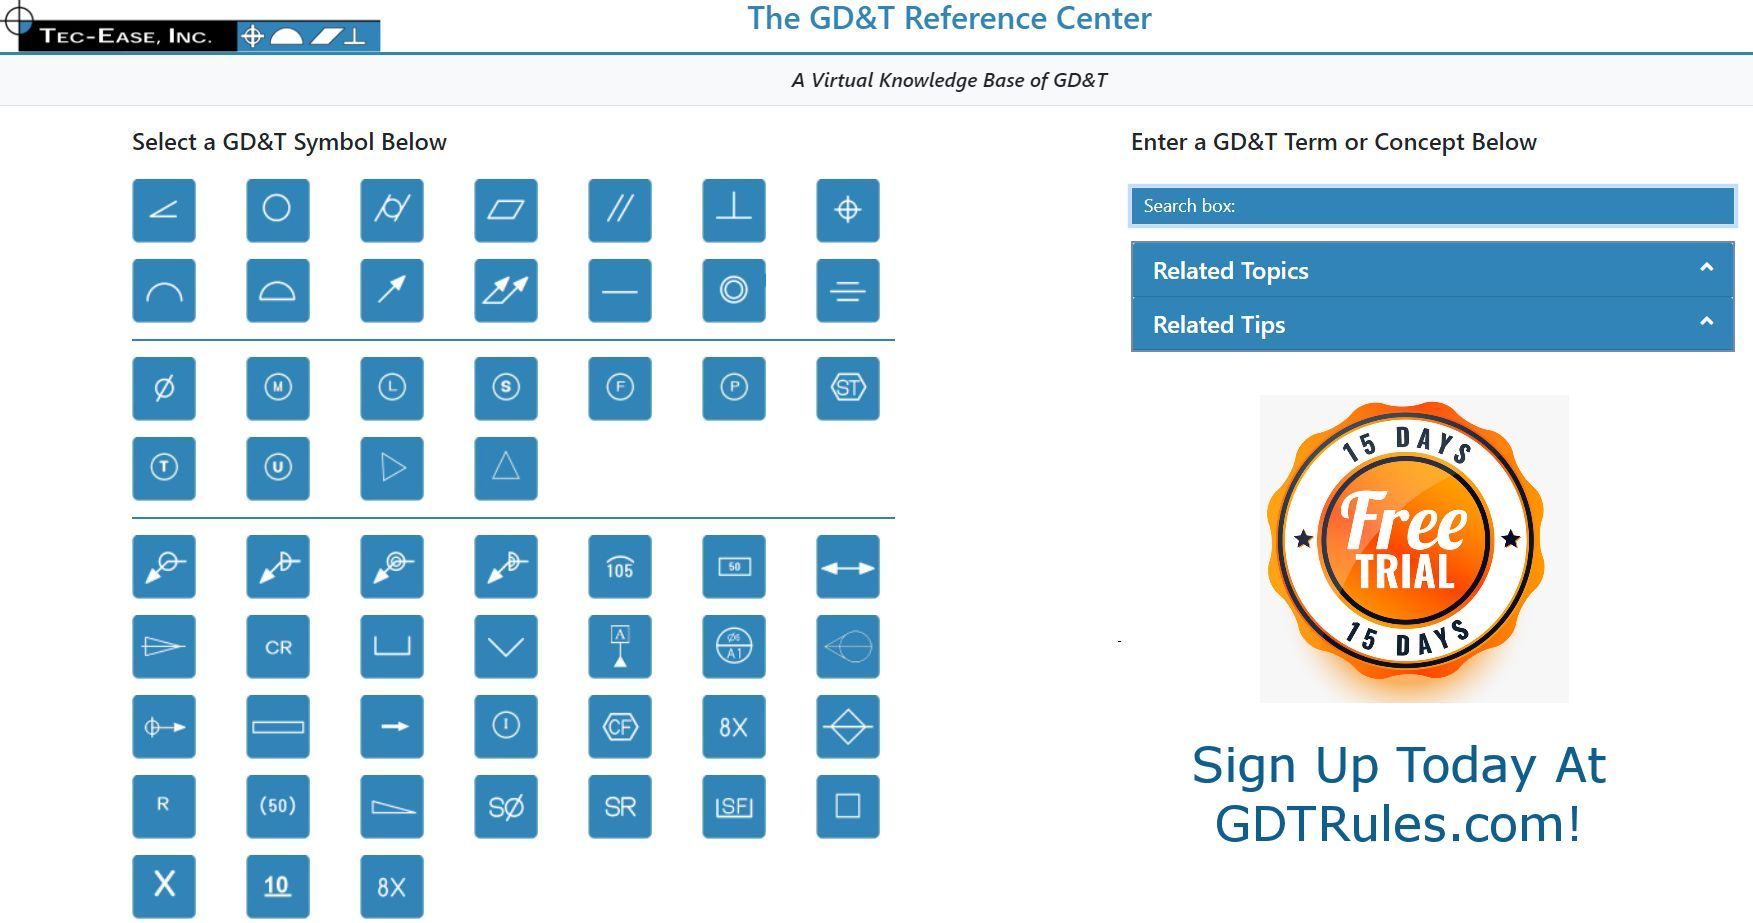 The GD&T Reference Center - Free Trial